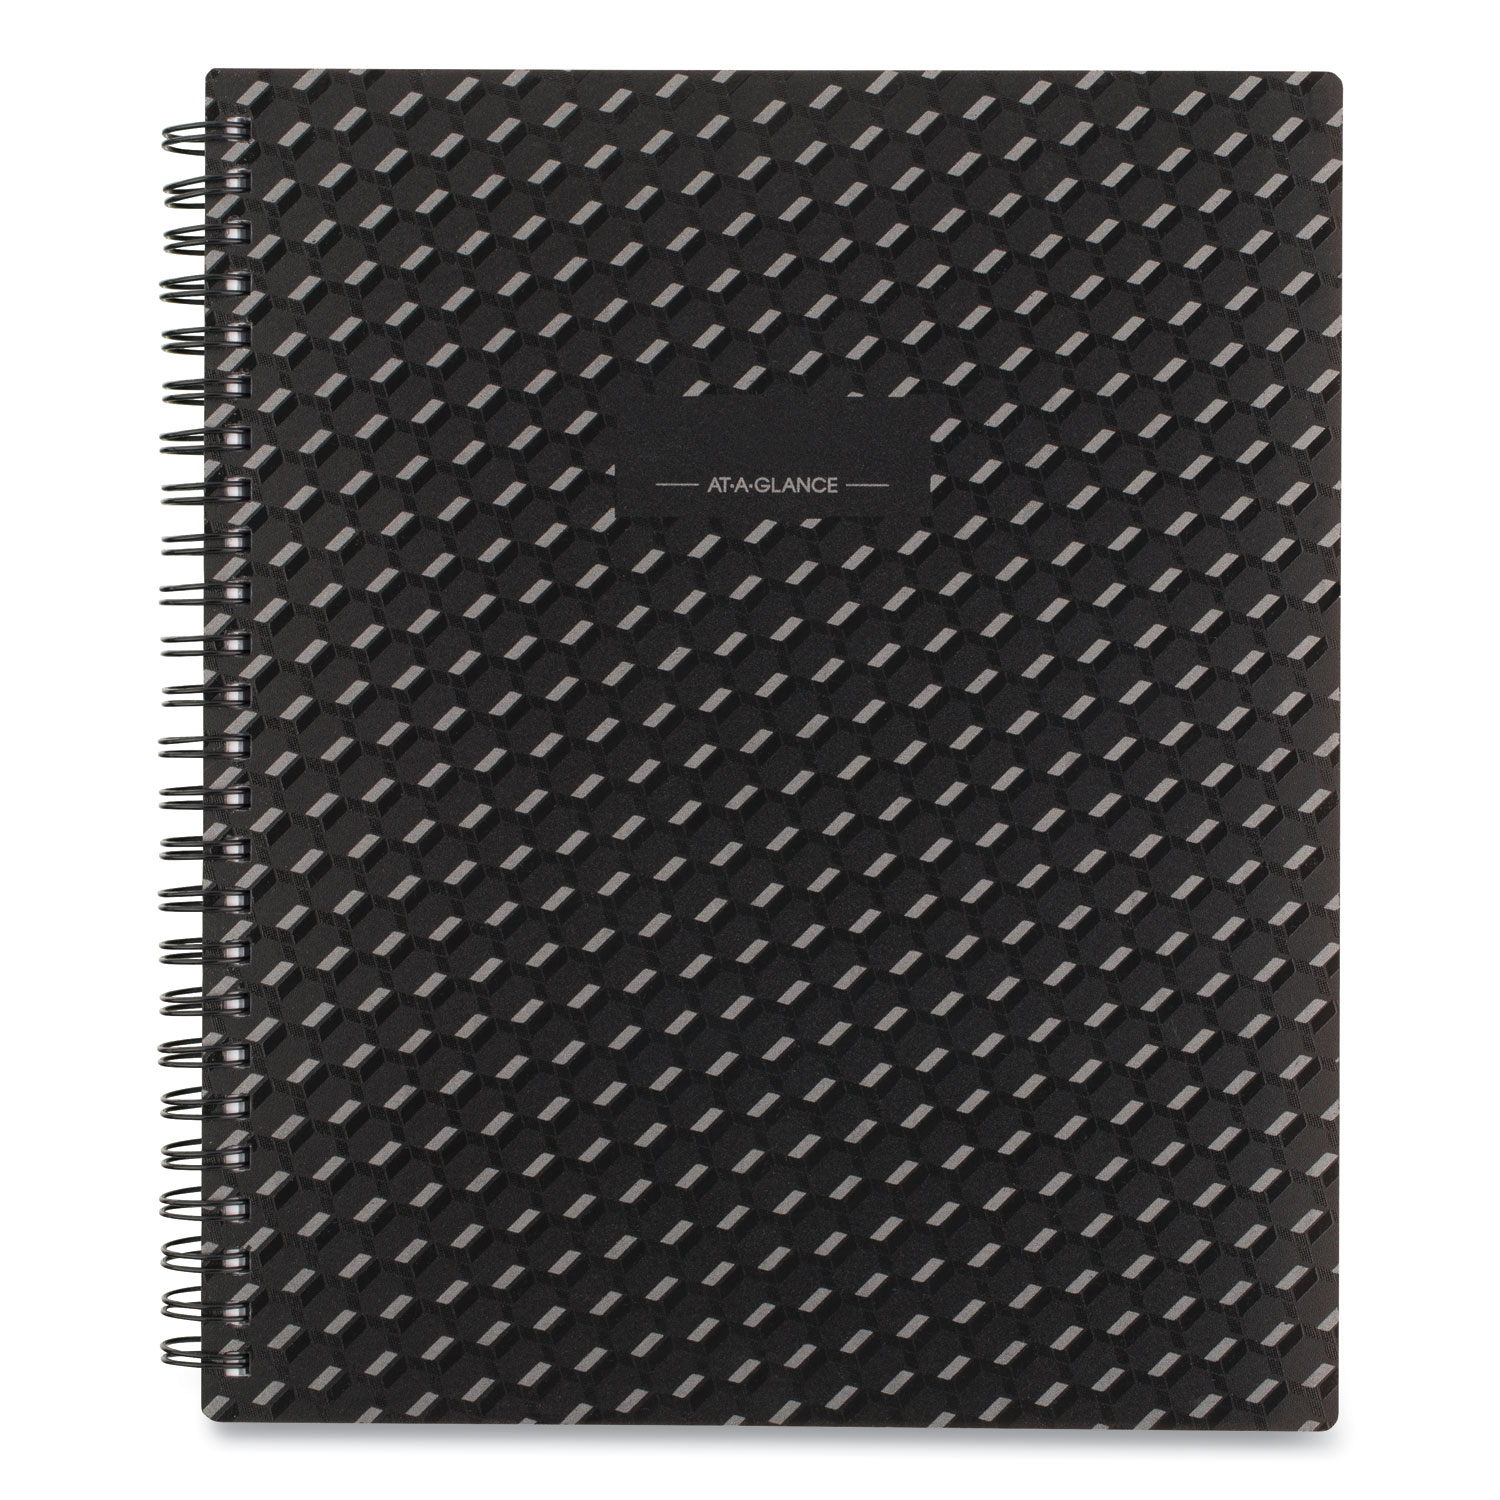  AT-A-GLANCE 75951P05 Elevation Poly Weekly/Monthly Planner, 8.75 x 7, Black, 2021 (AAG75951P05) 